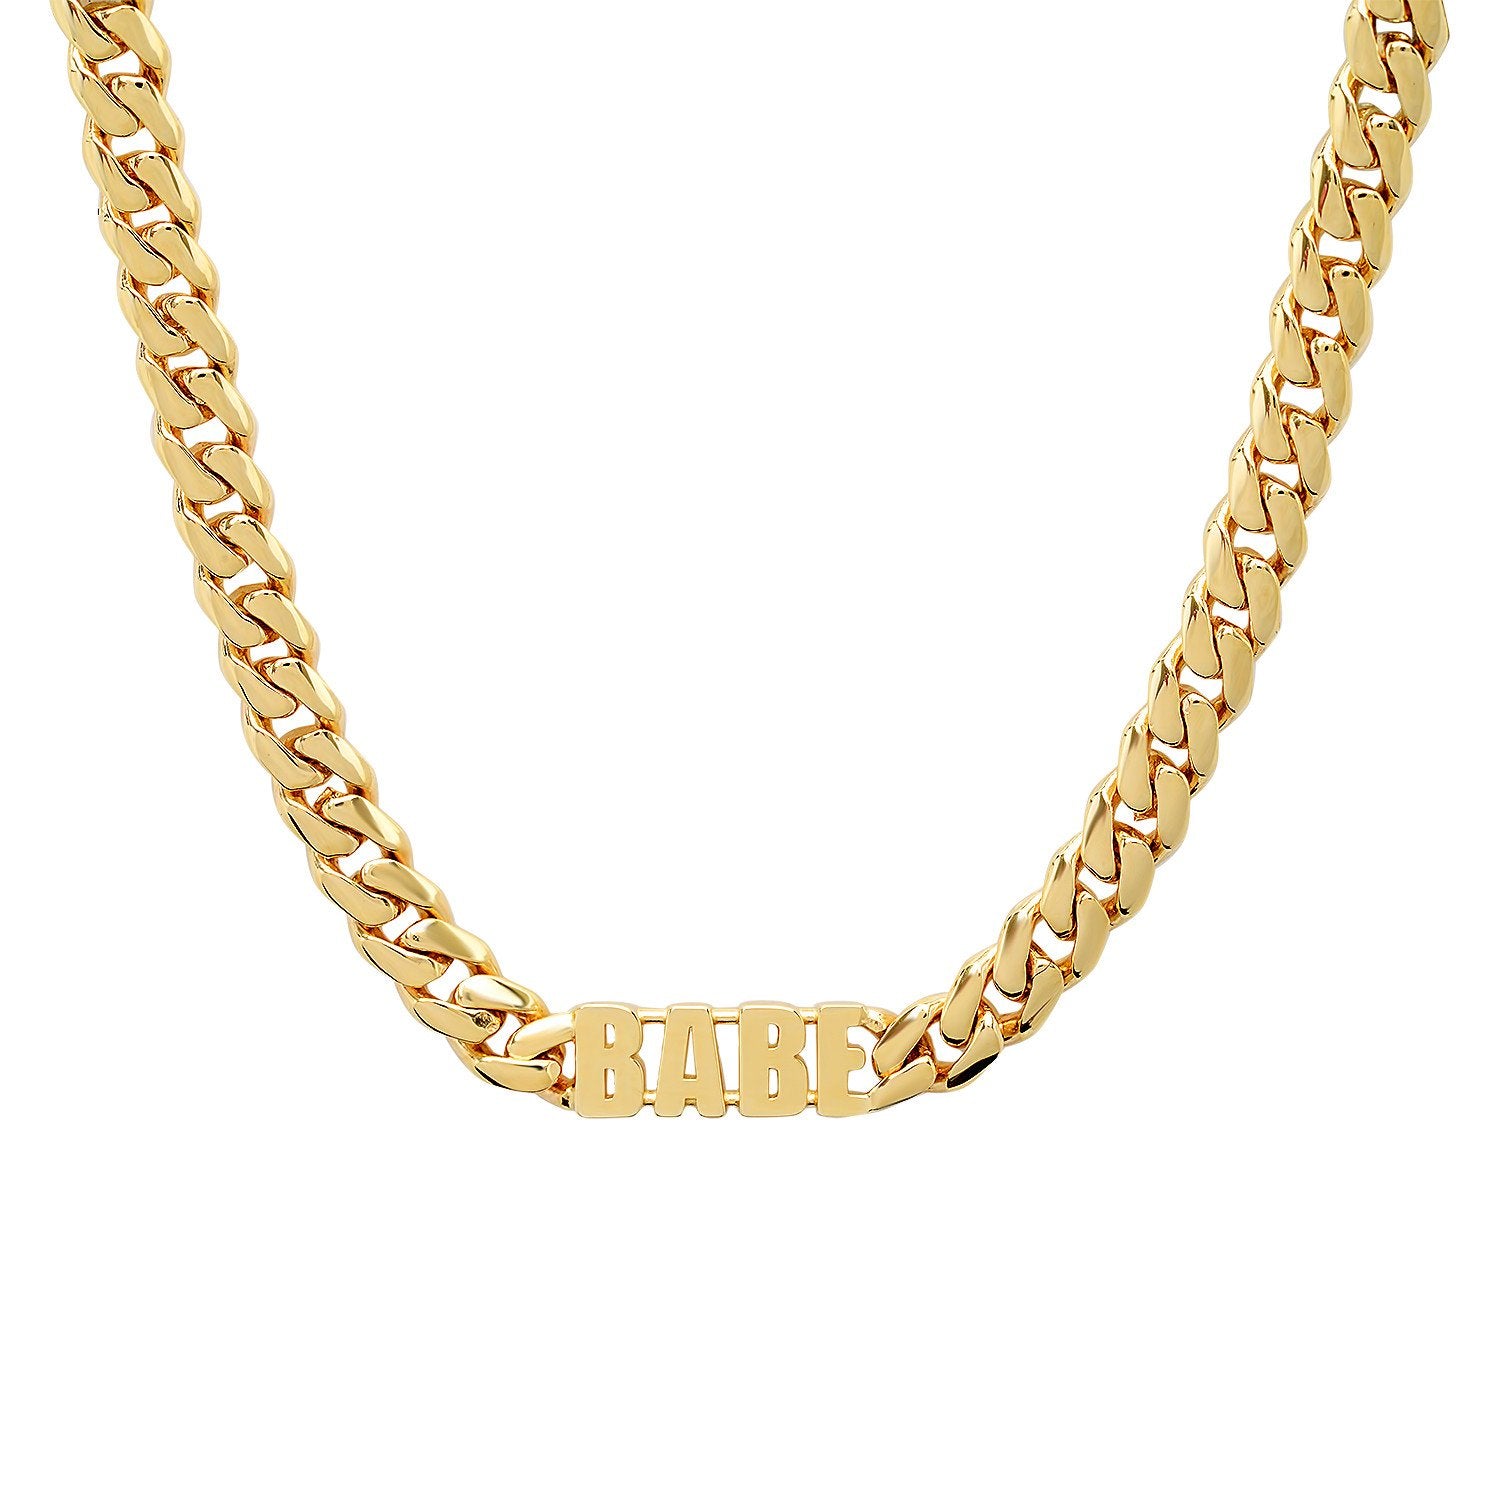 Babe Necklace, Heavy Chain